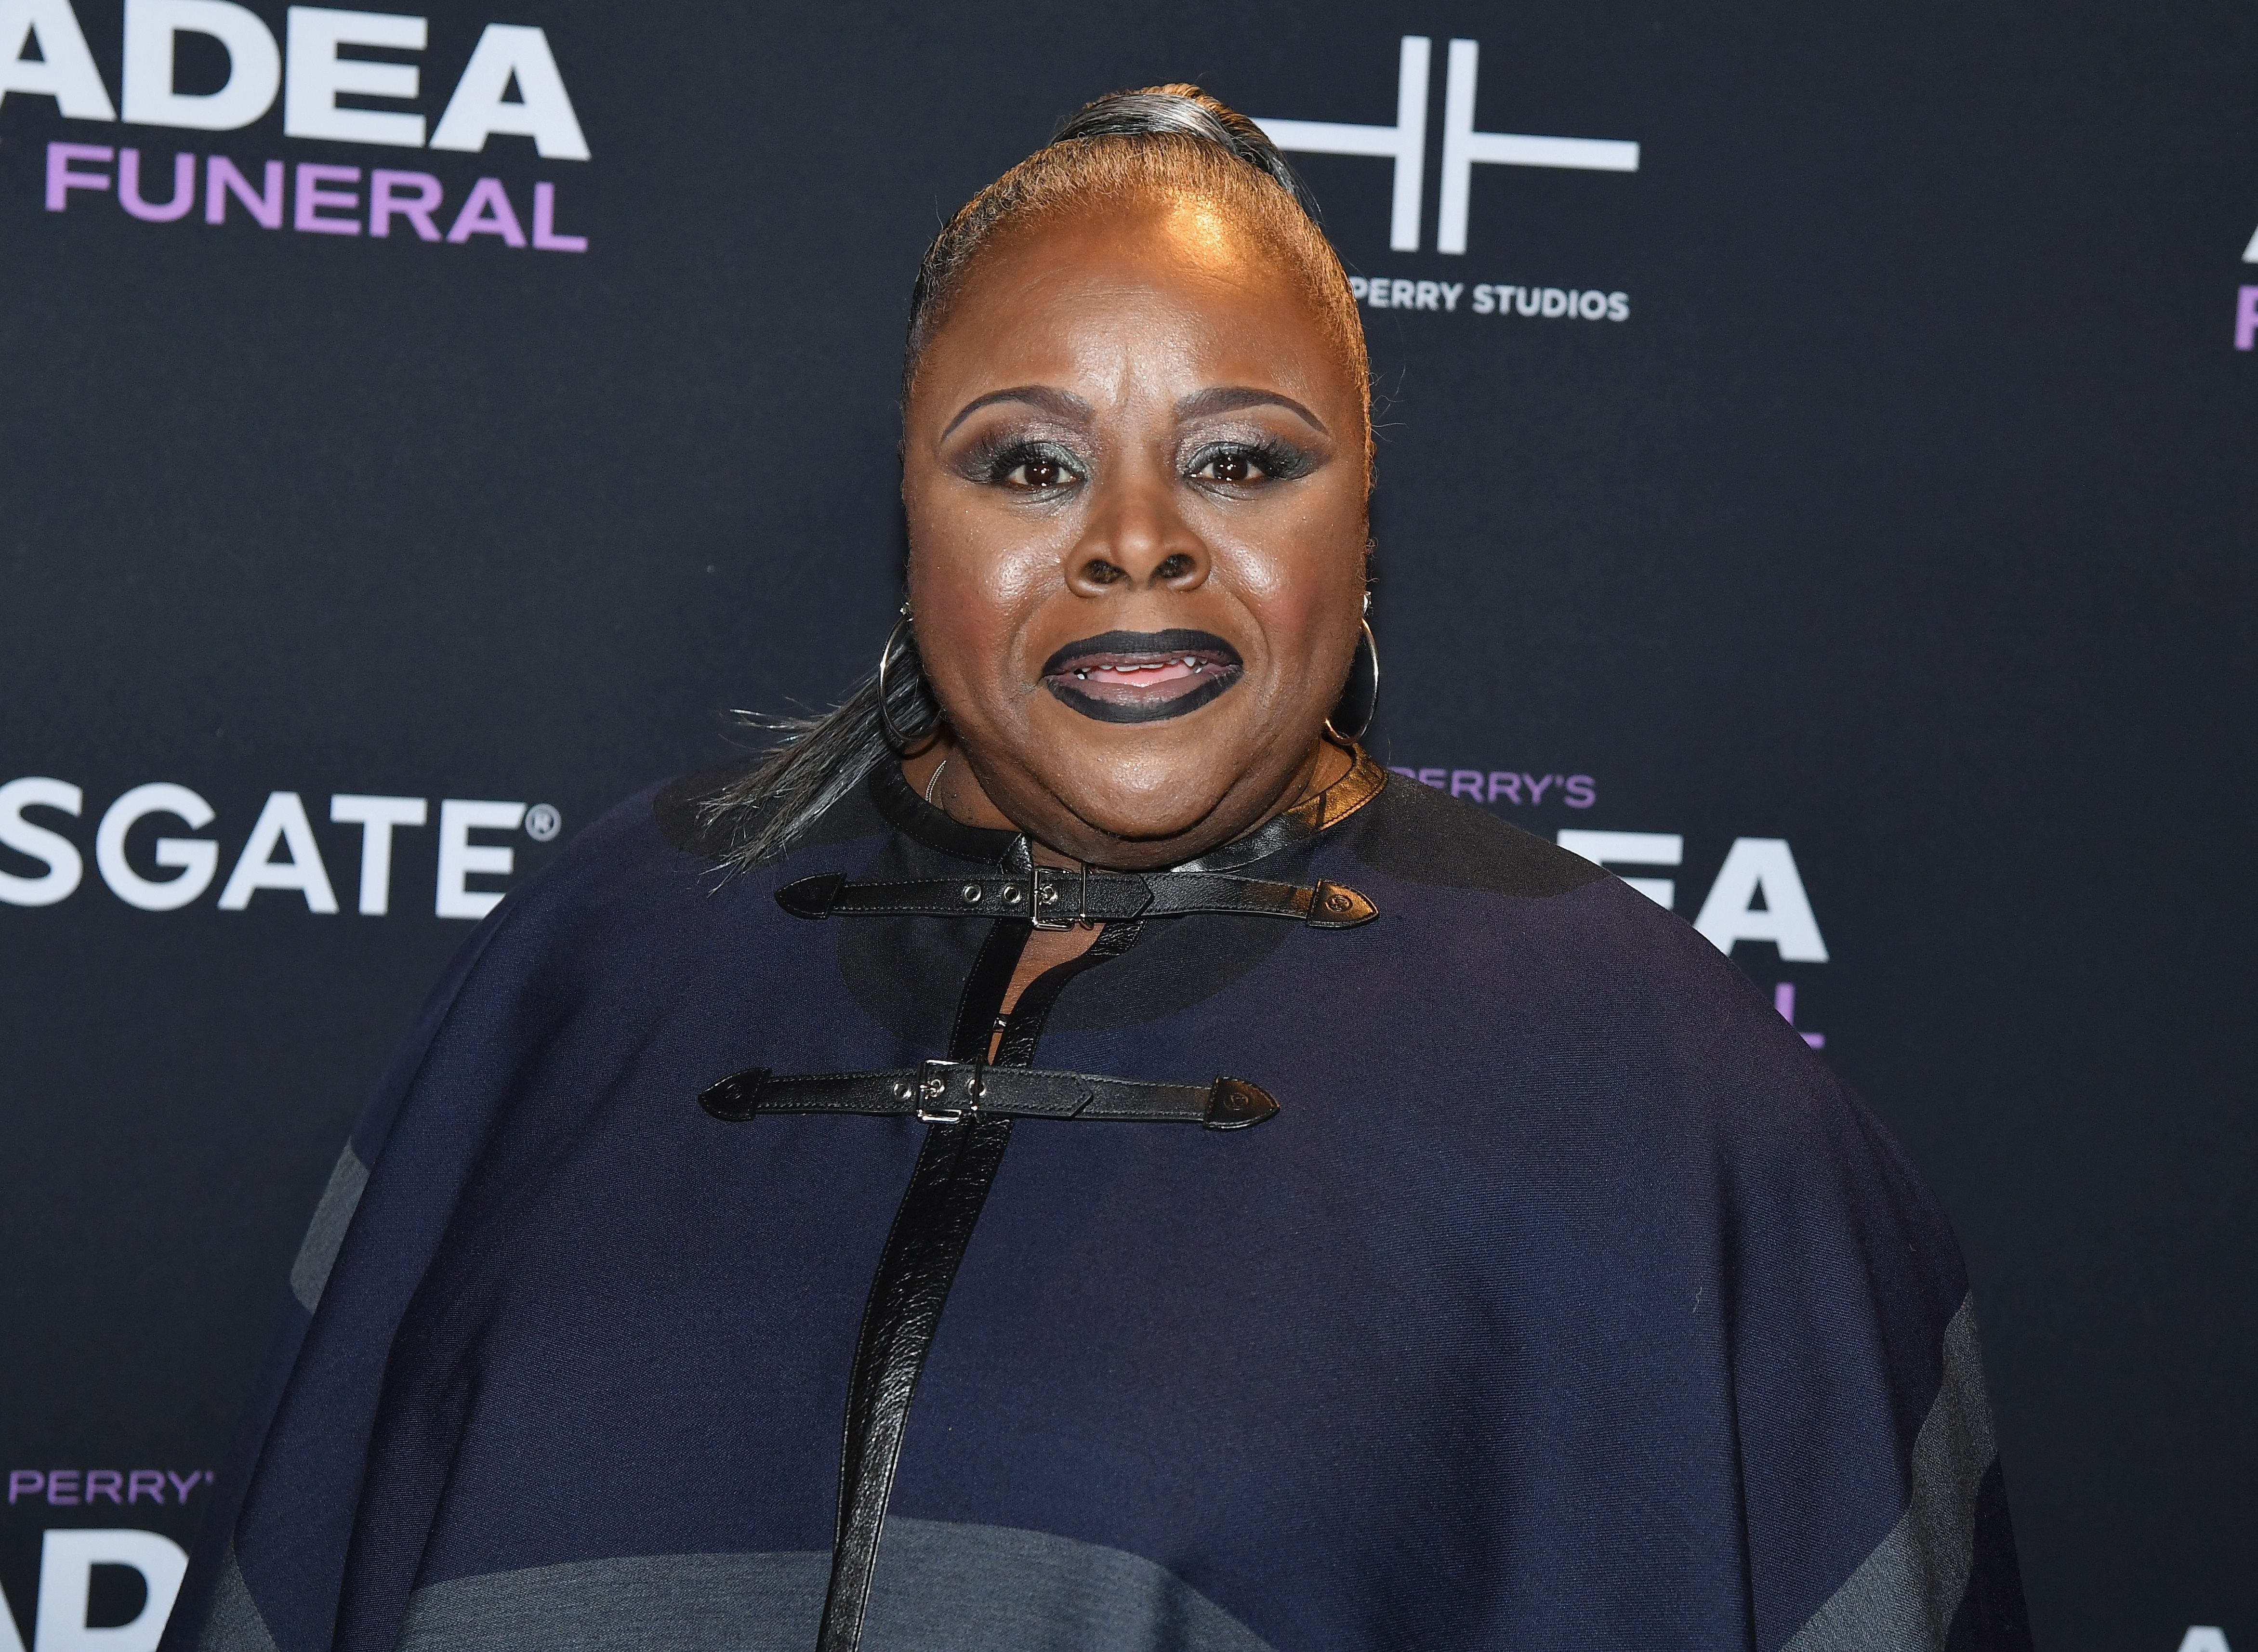  Cassi Davis at a special screening of Tyler Perry's "A Madea Family Funeral" at SVA Theater on February 25, 2019 in New York City | Photo: Getty Images